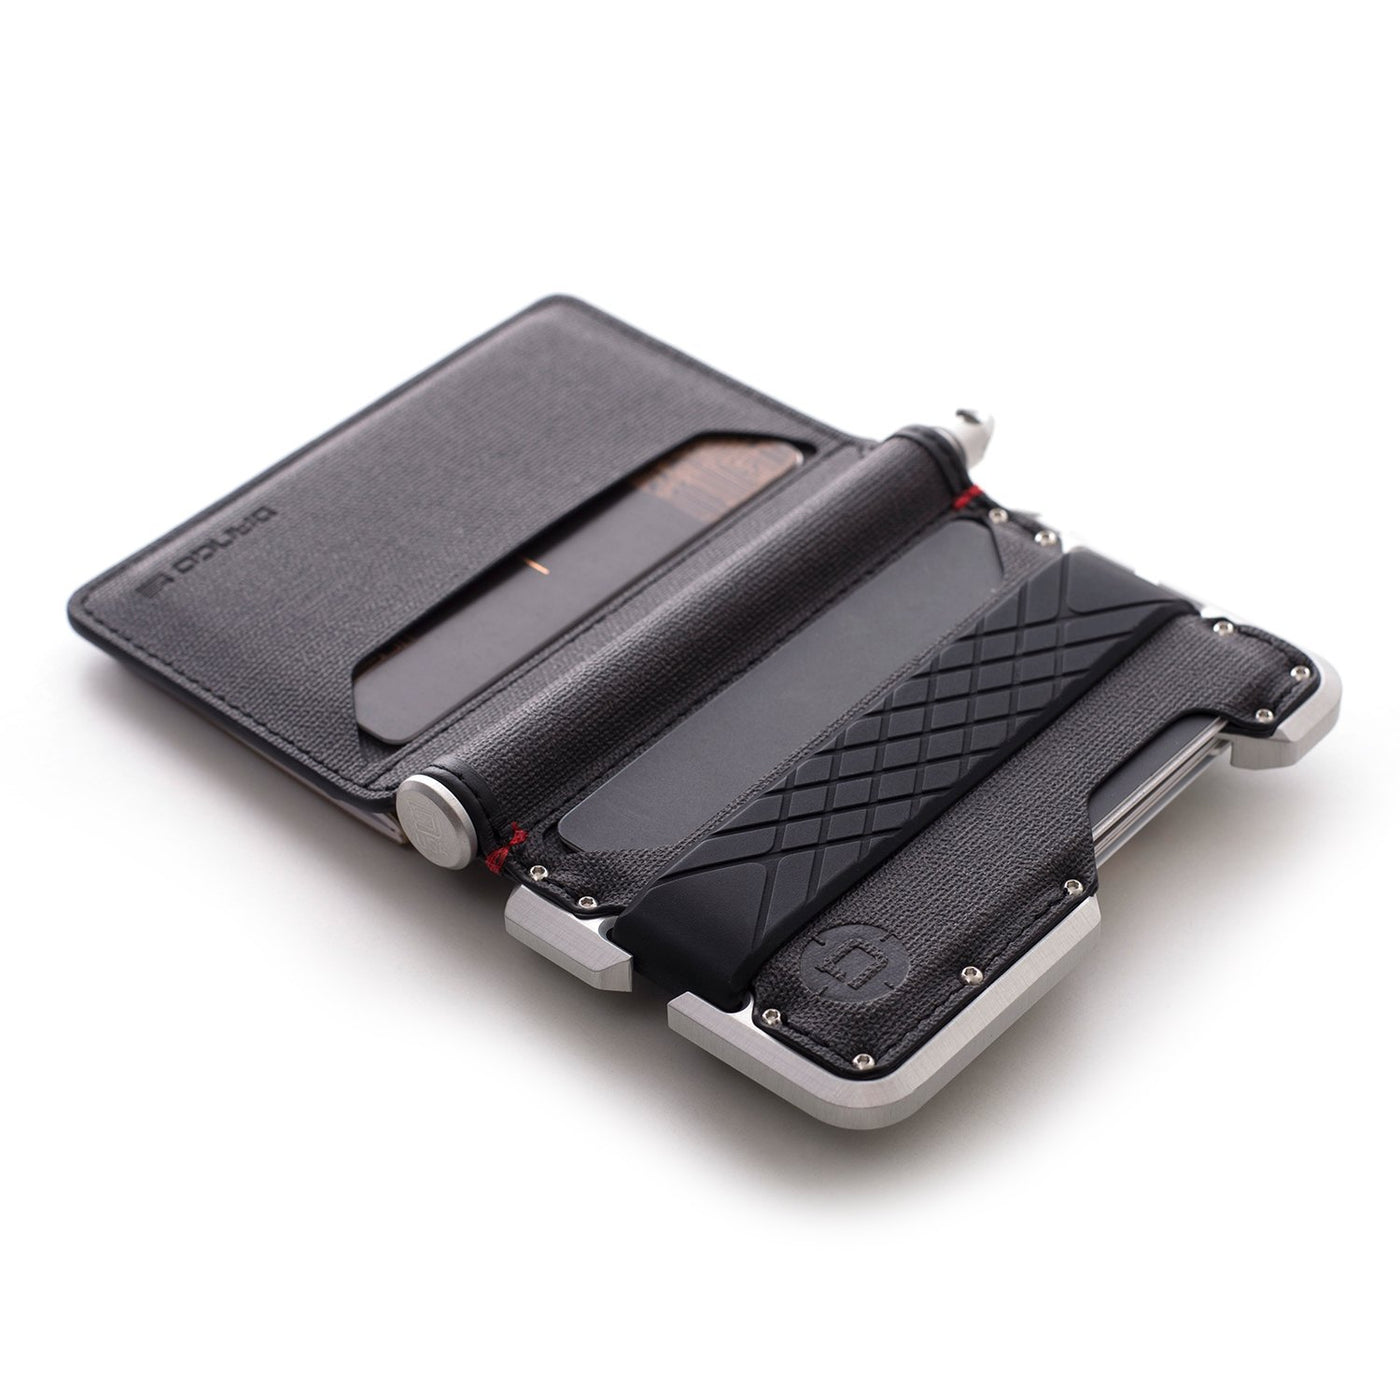 D Series Bifold Pocket with Pen Cavity (Pocket Only)